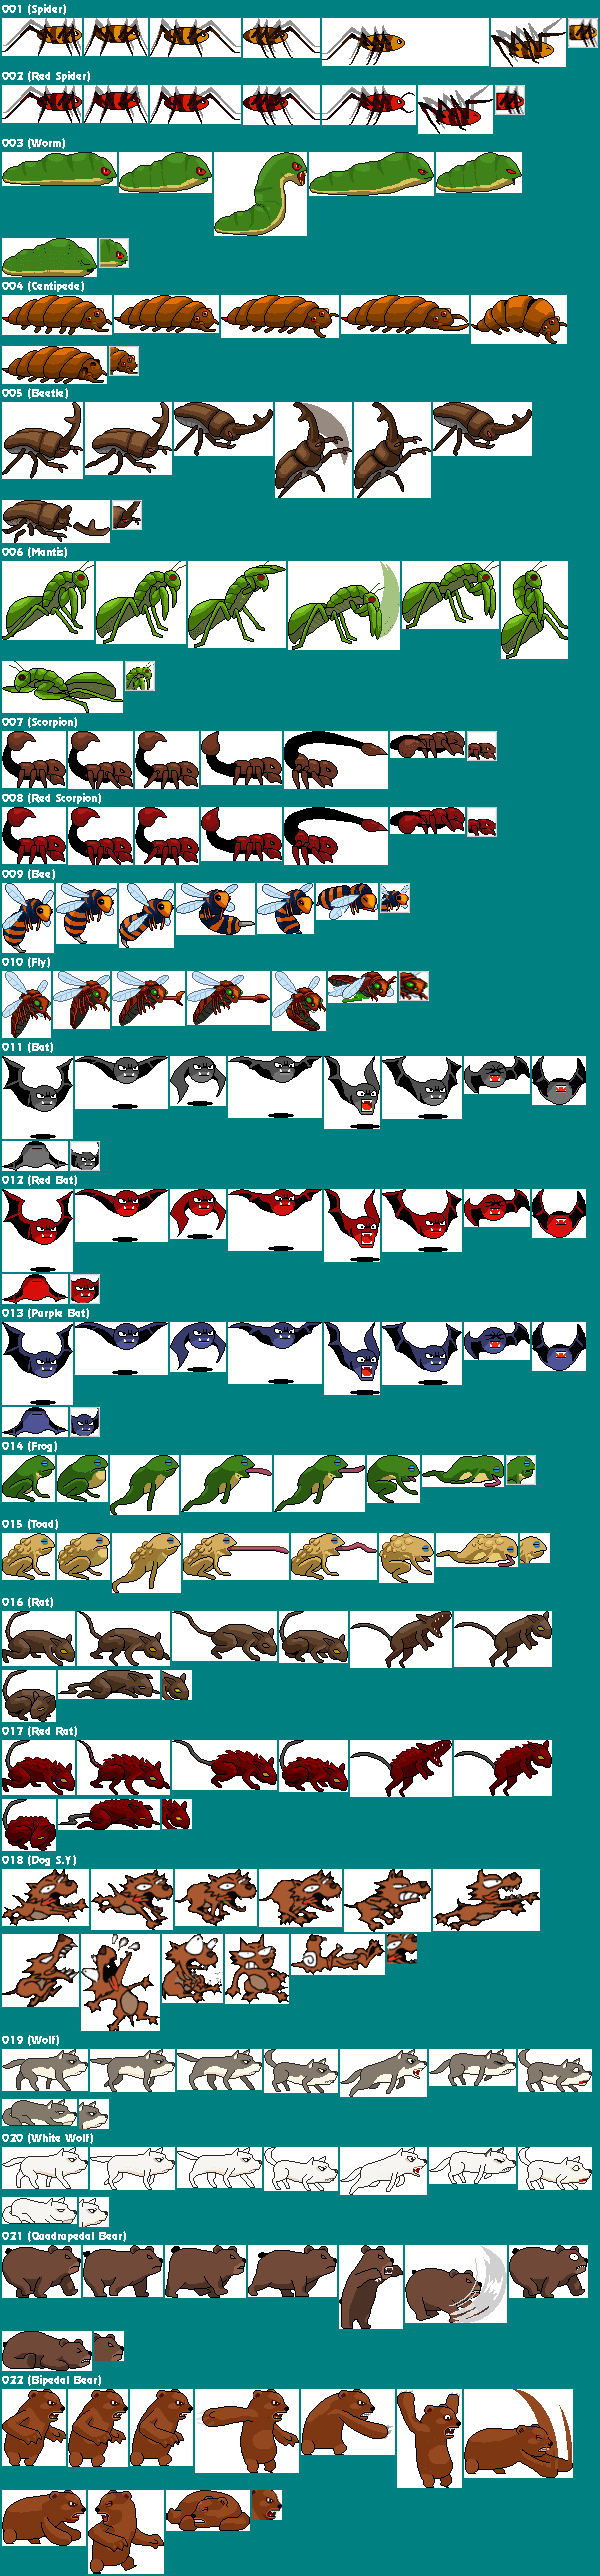 "World of Mighty Fighter" Enemies (1/7)